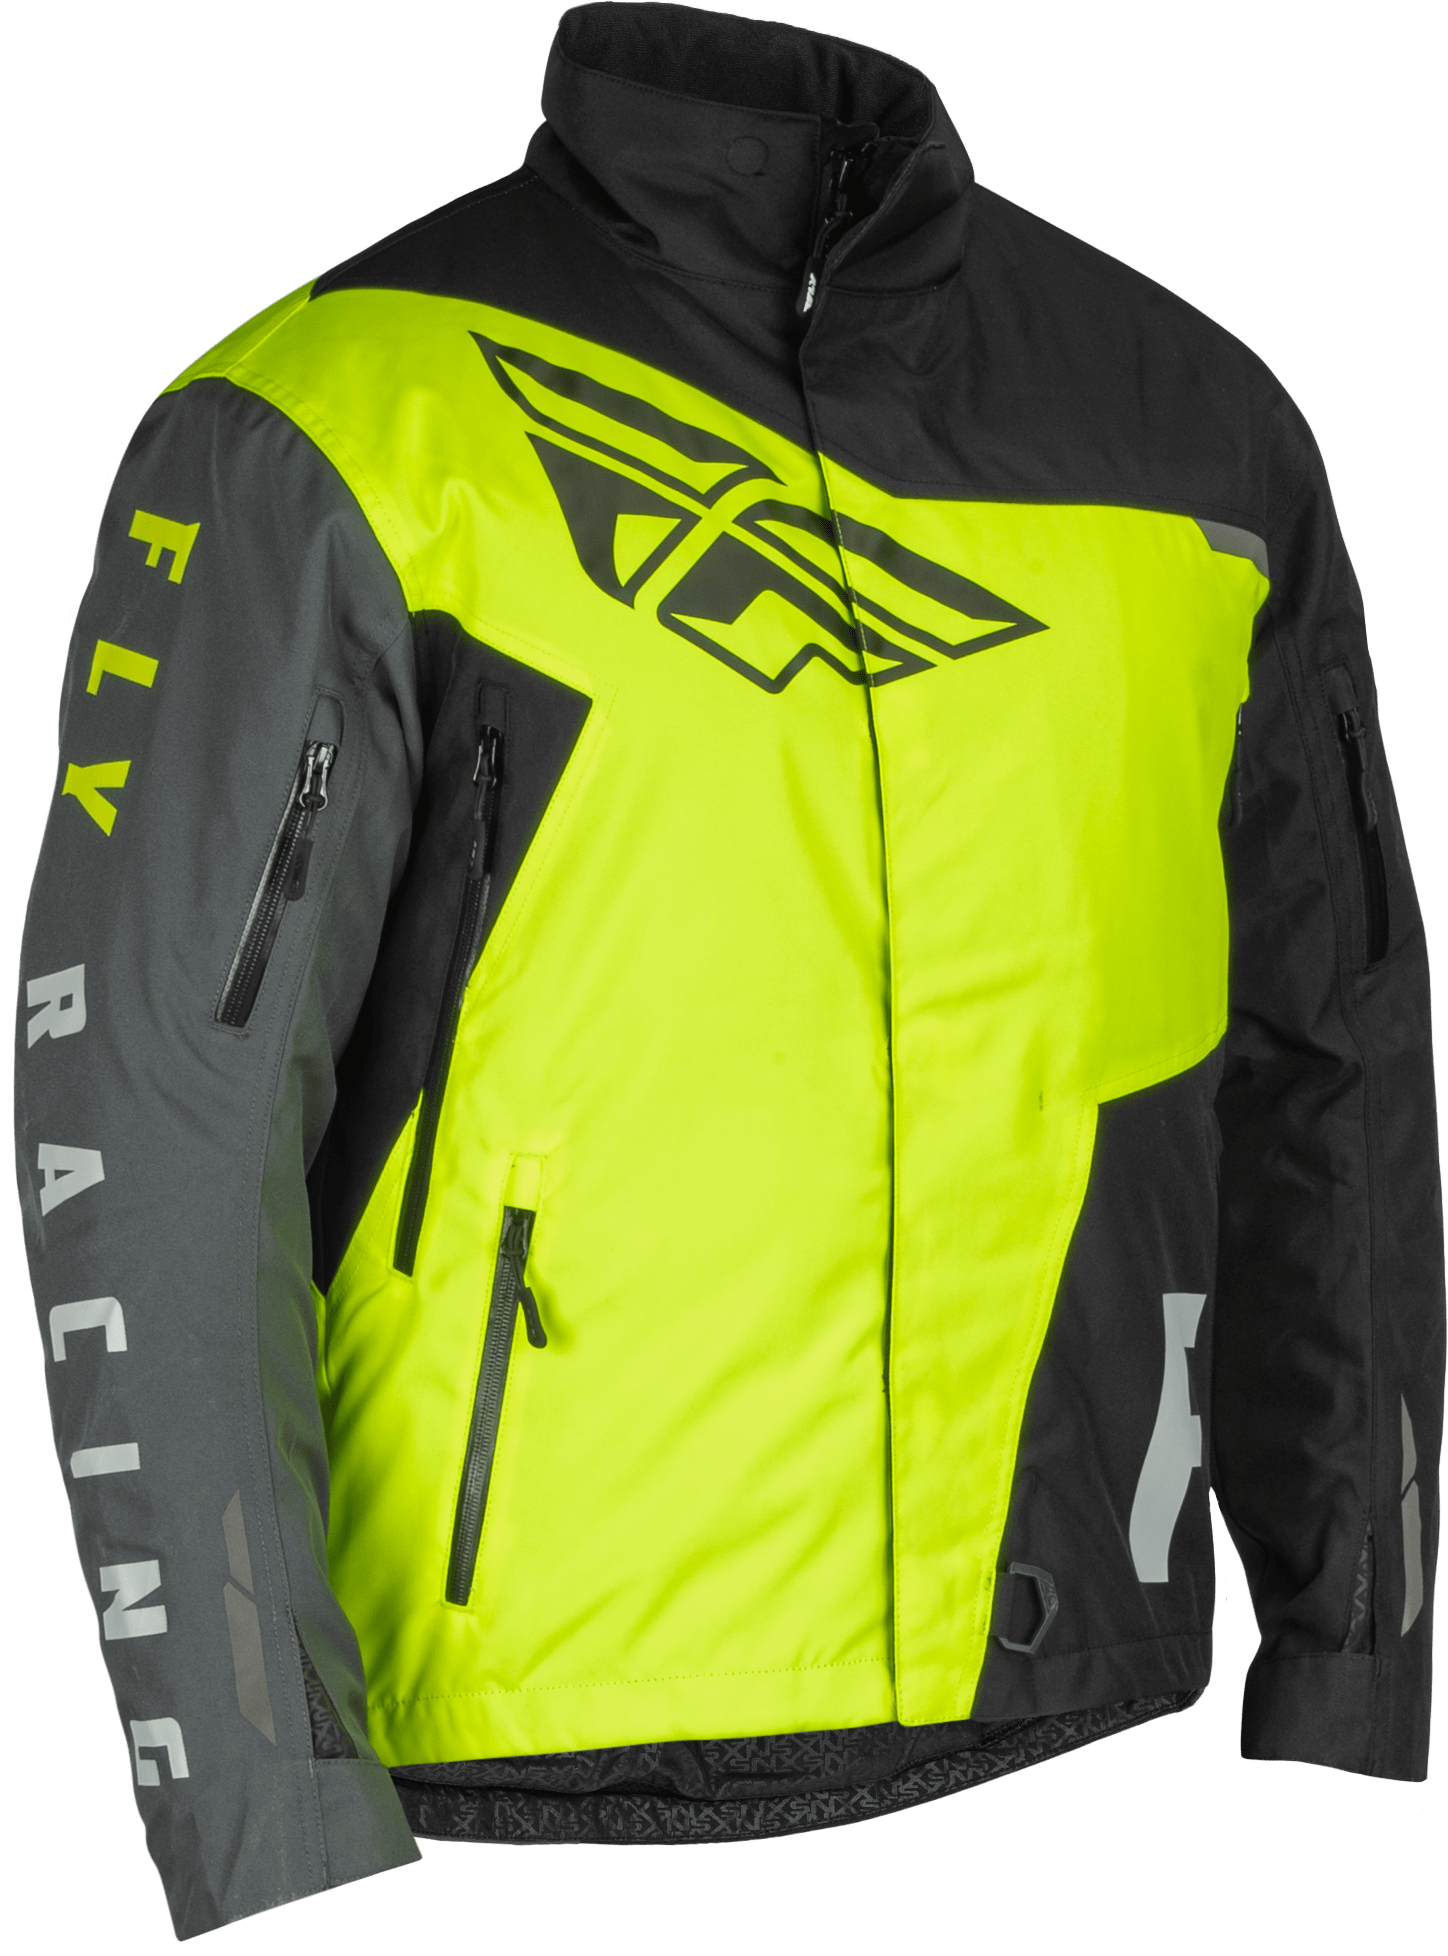 Western Powersports Jacket Black/Hi-Vis Yellow / Youth LG Youth Snx Pro Jacket By Fly Racing 470-5403YL